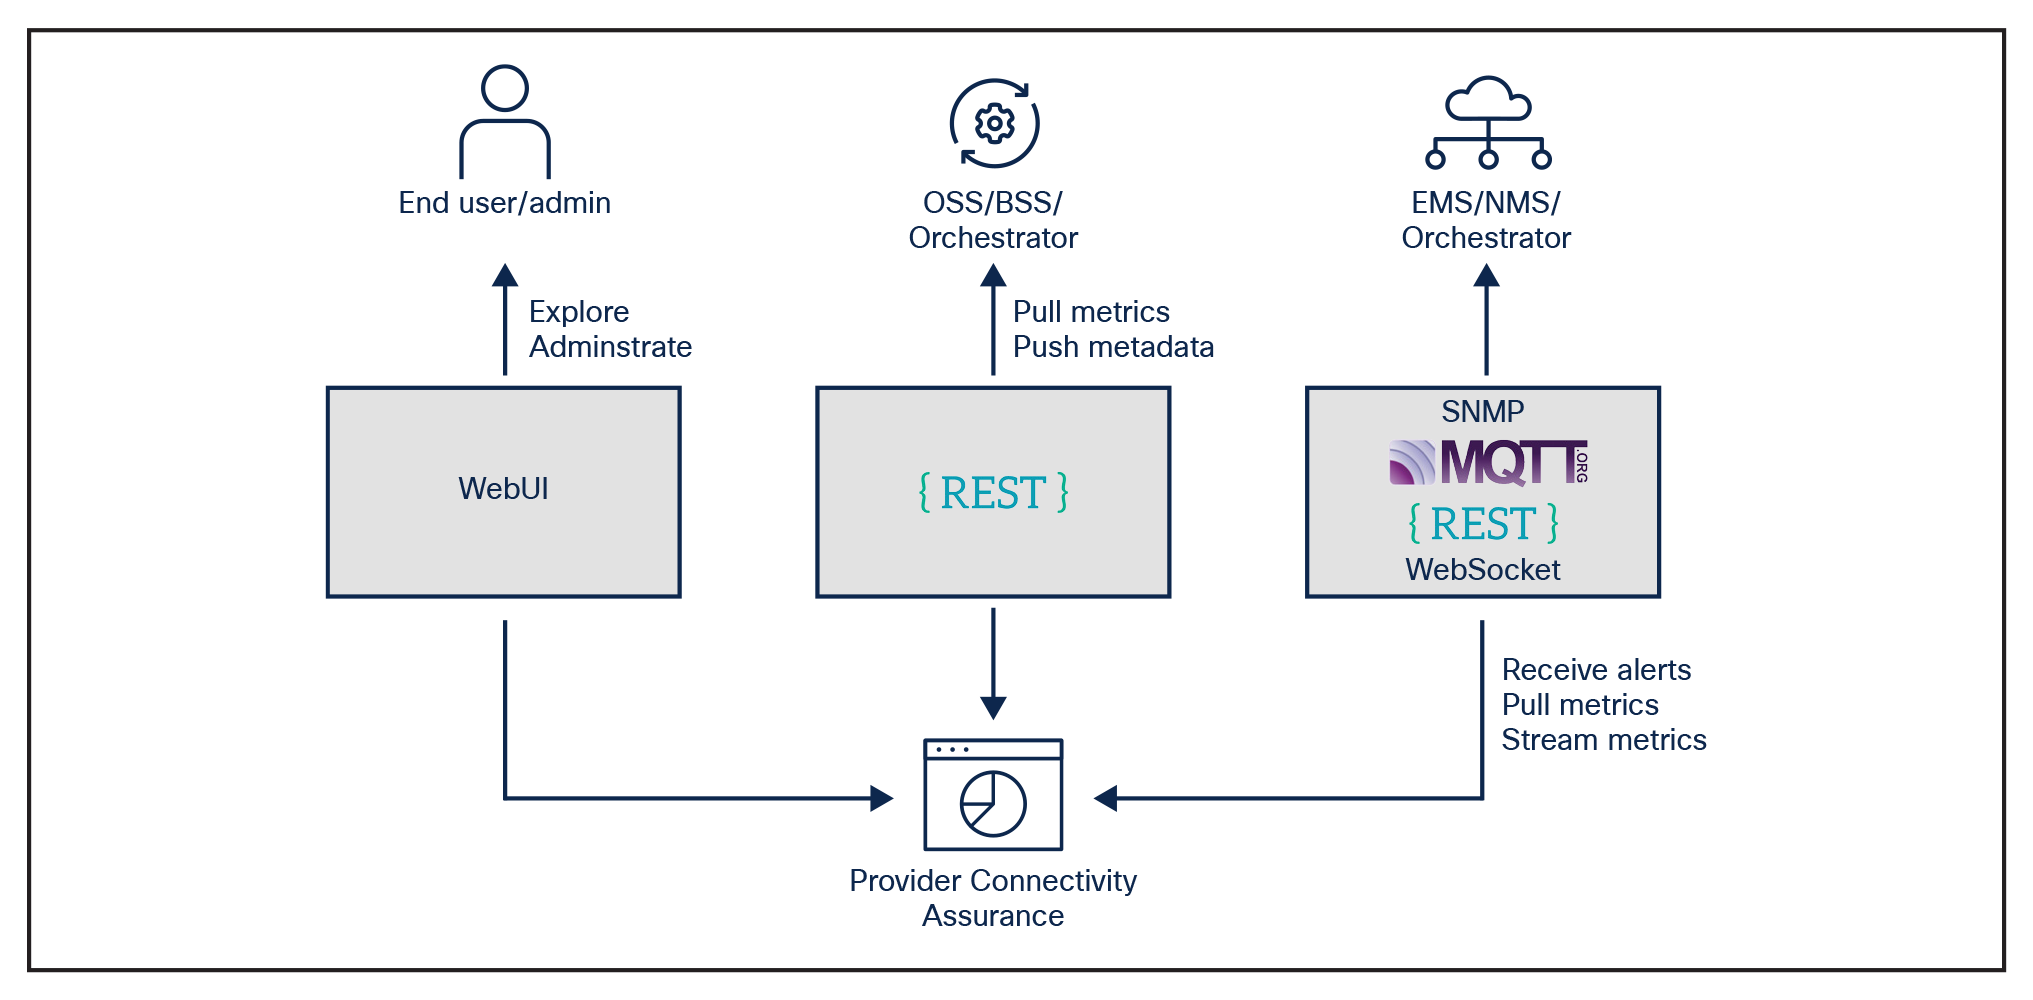 Provider Connectivity Assurance open APIs to northbound systems.